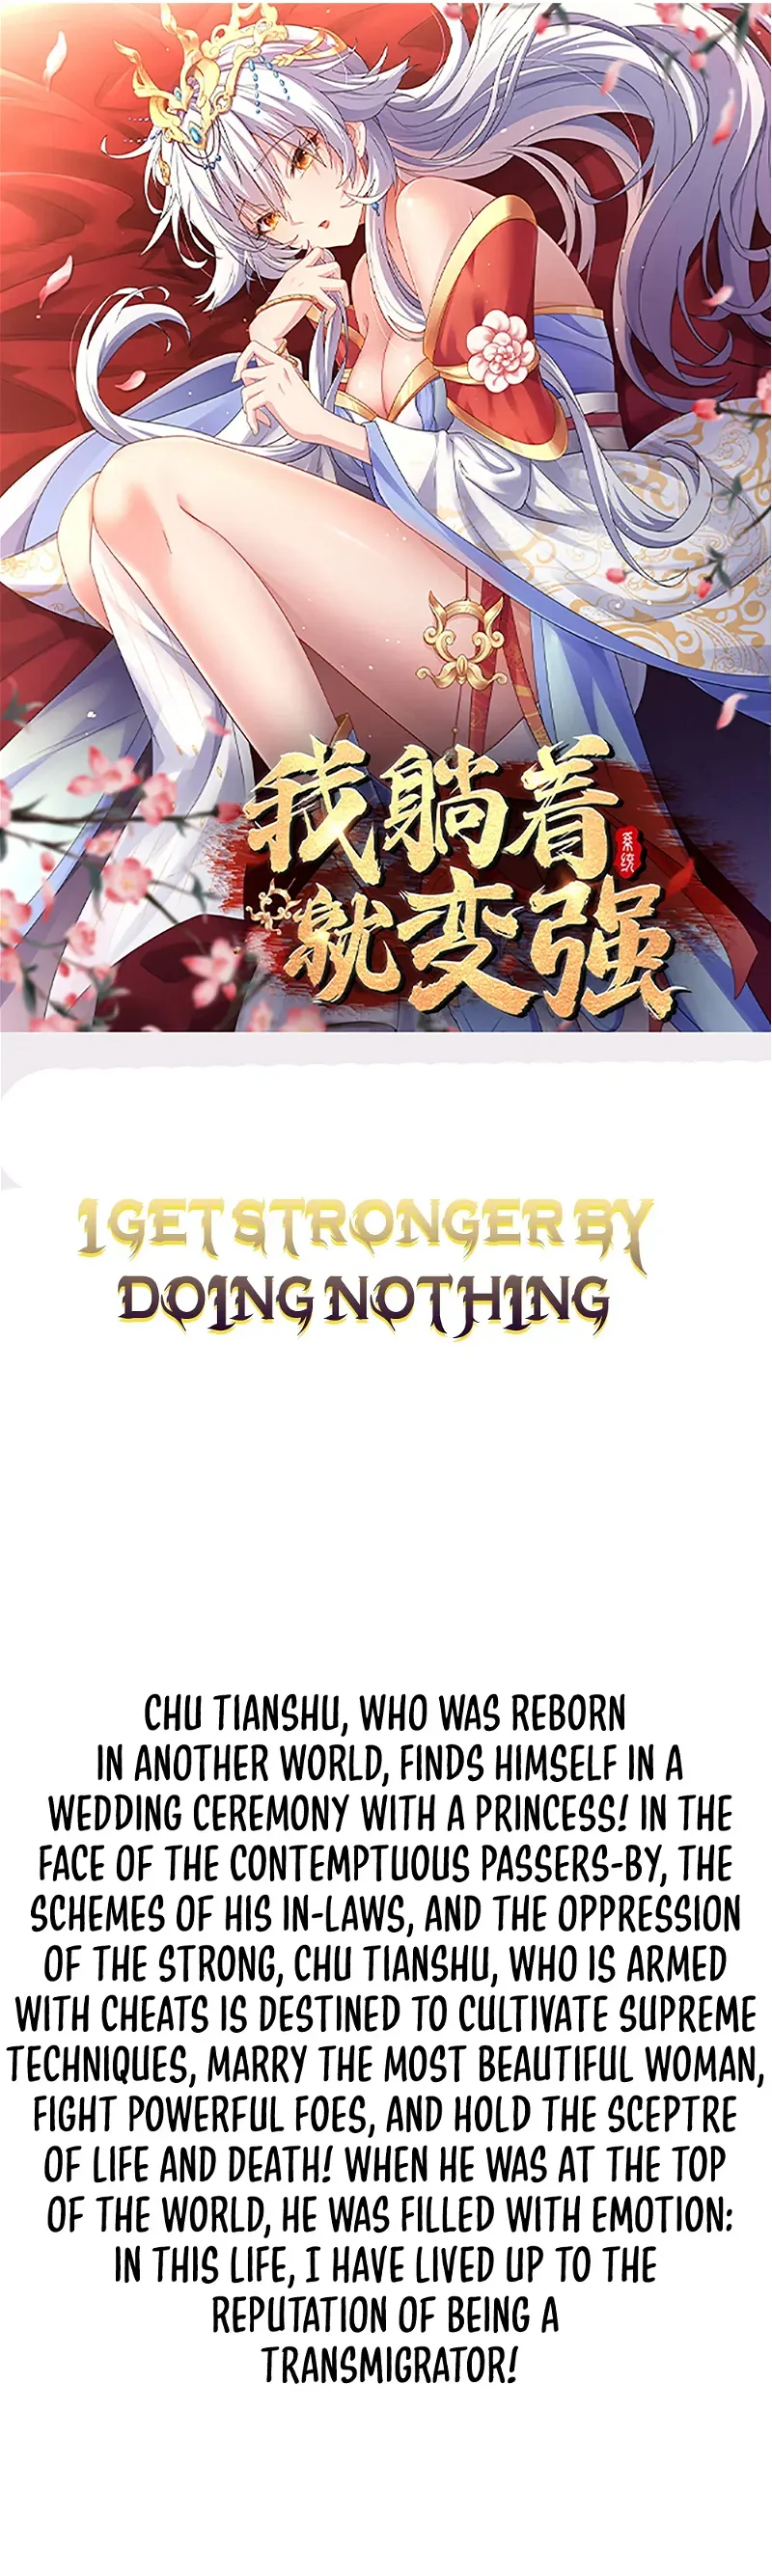 I Get Stronger By Doing Nothing - Page 1